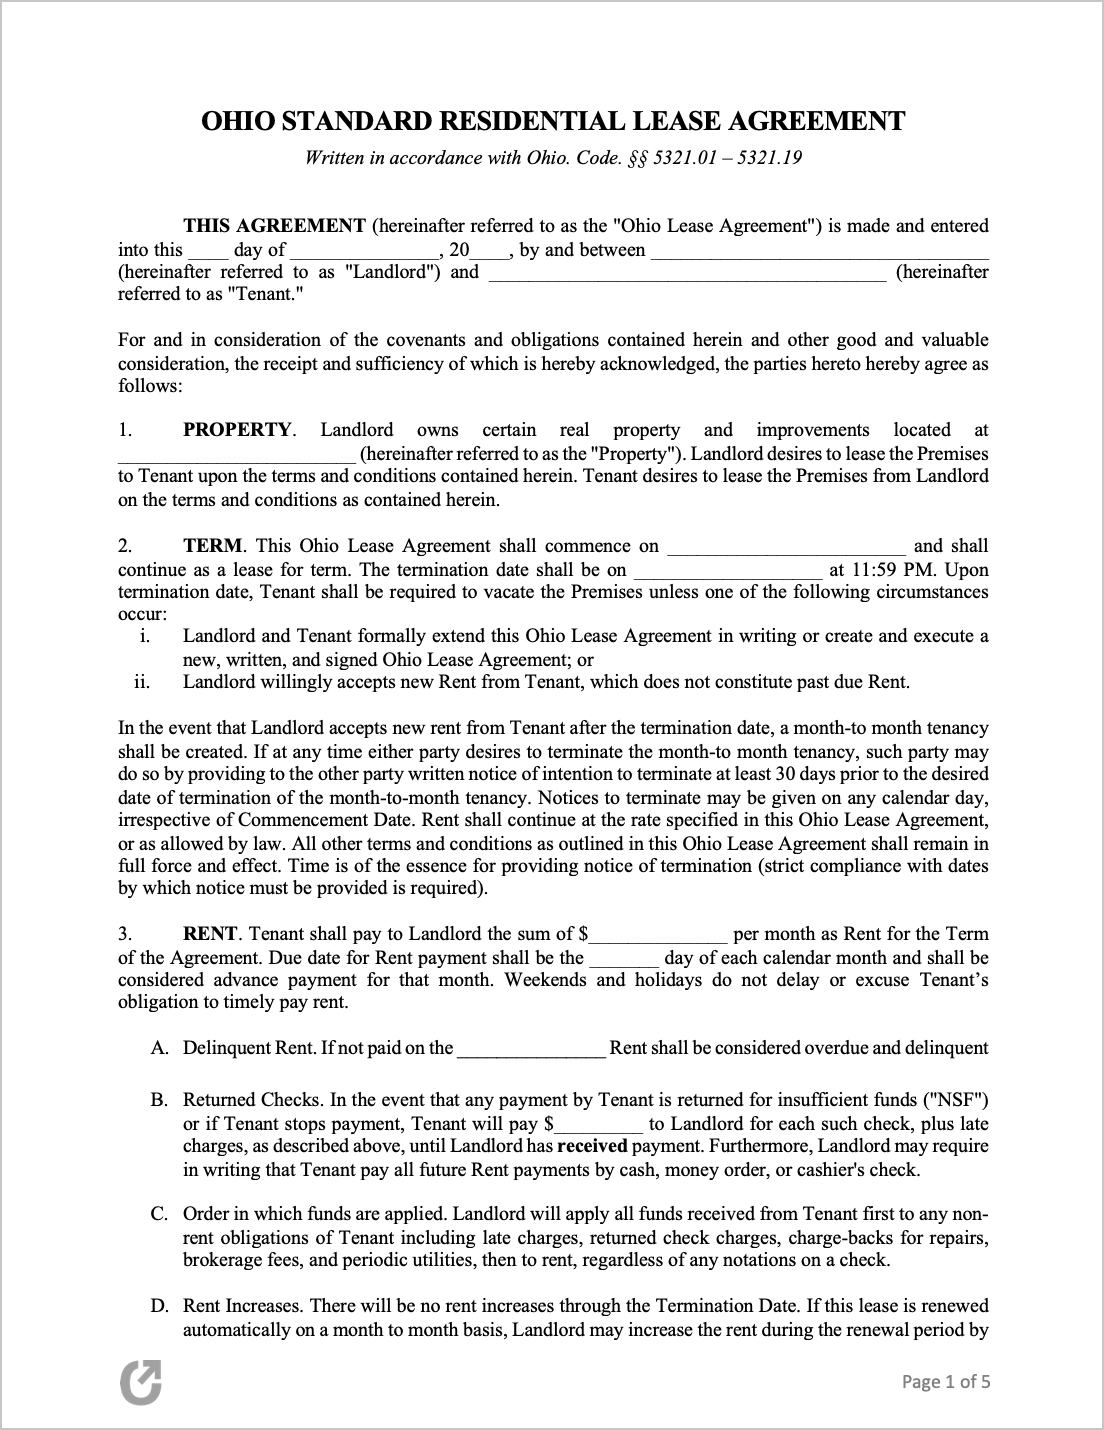 Free Ohio Standard Residential Lease Agreement  PDF  WORD  RTF Inside free printable residential lease agreement template